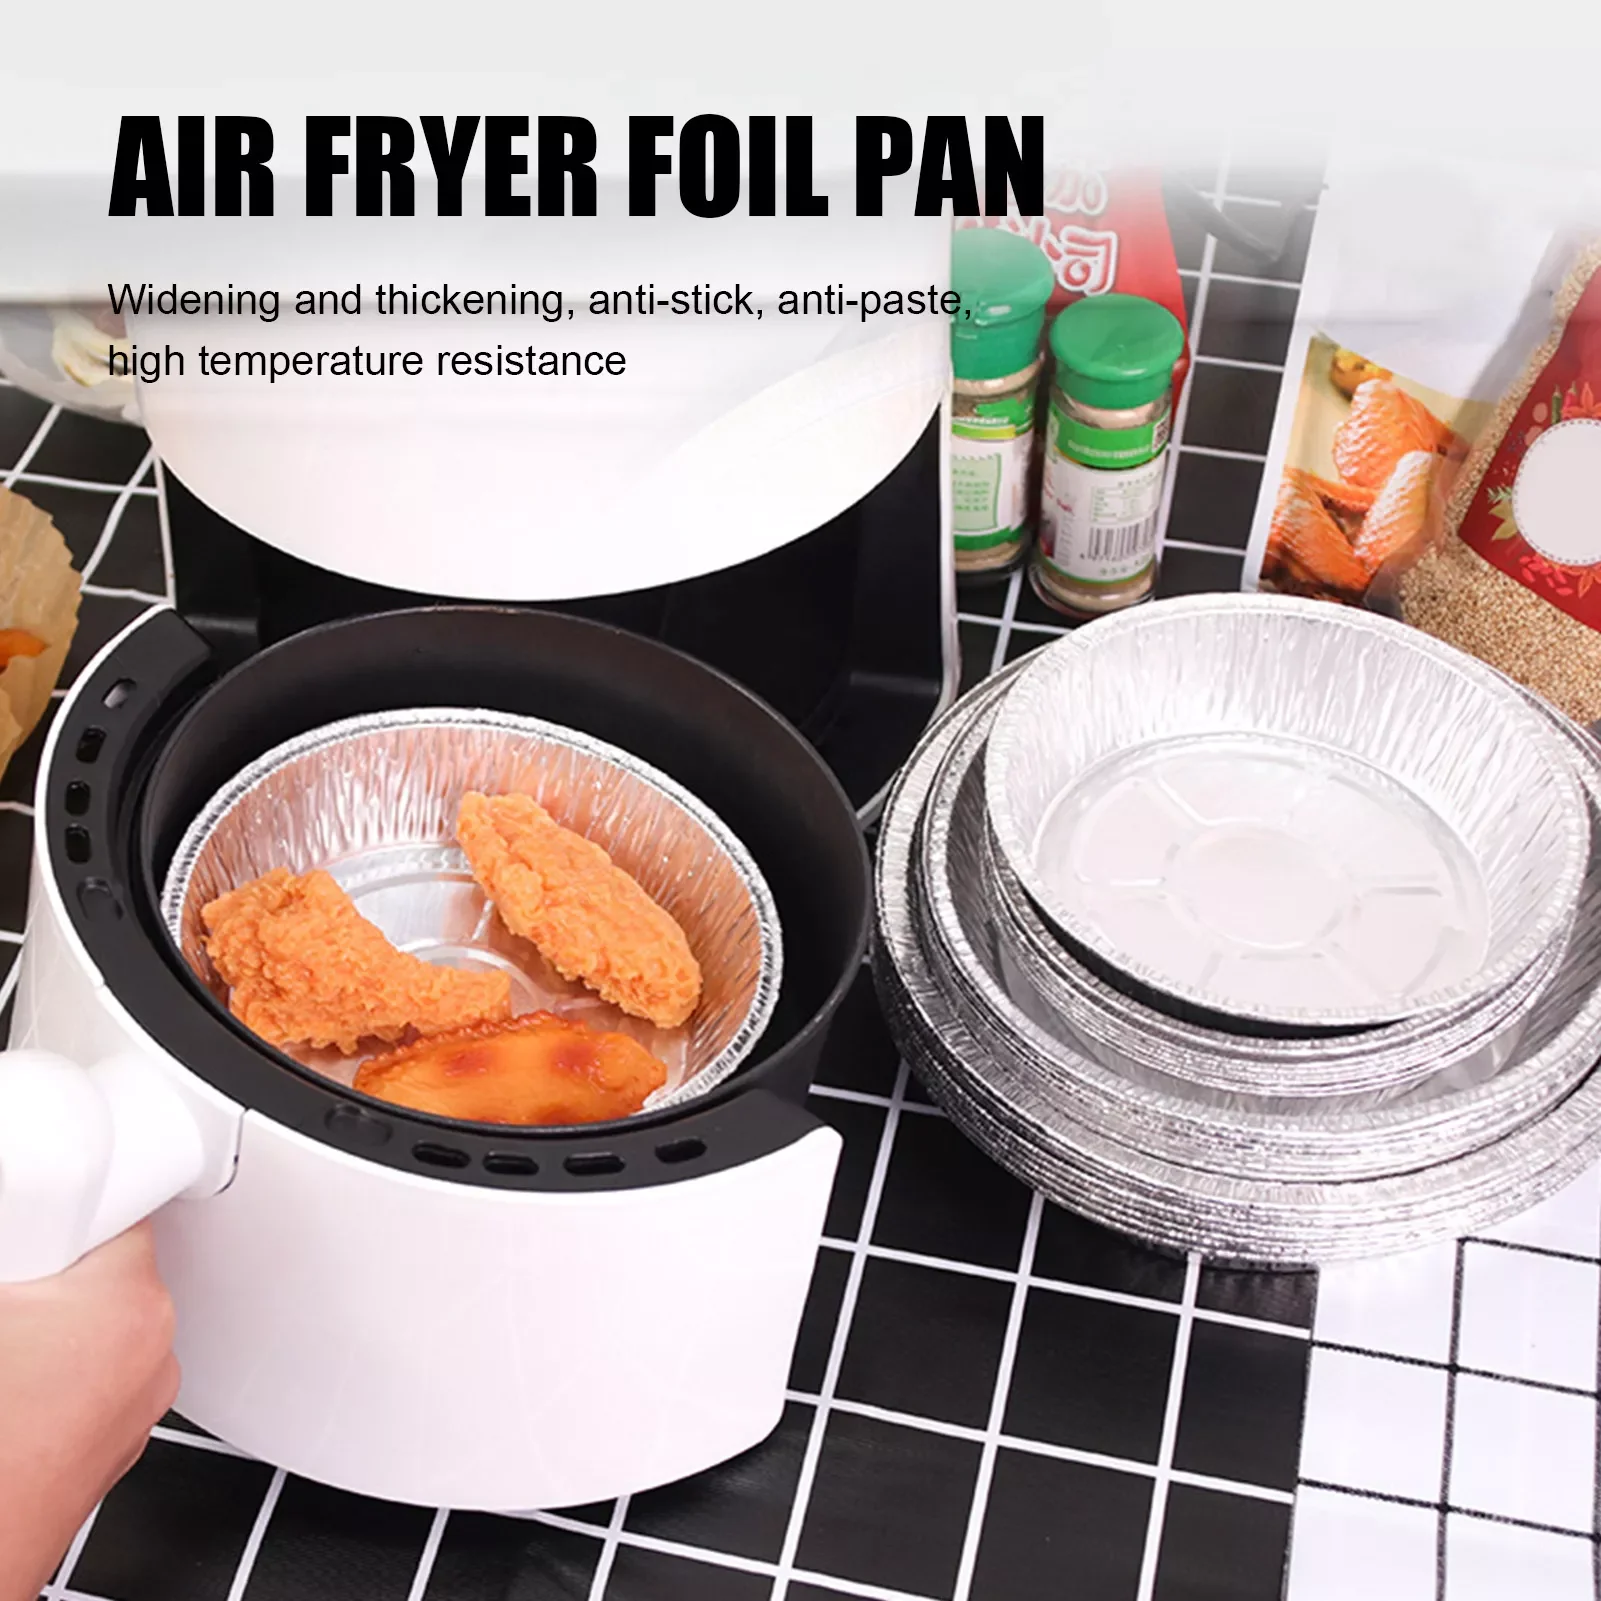 

Round Aluminum Foil Trays Convenient Food Foil Pans Food Foil Containers For Air Fryer Baking Storing Reheating Meal Prep Easy